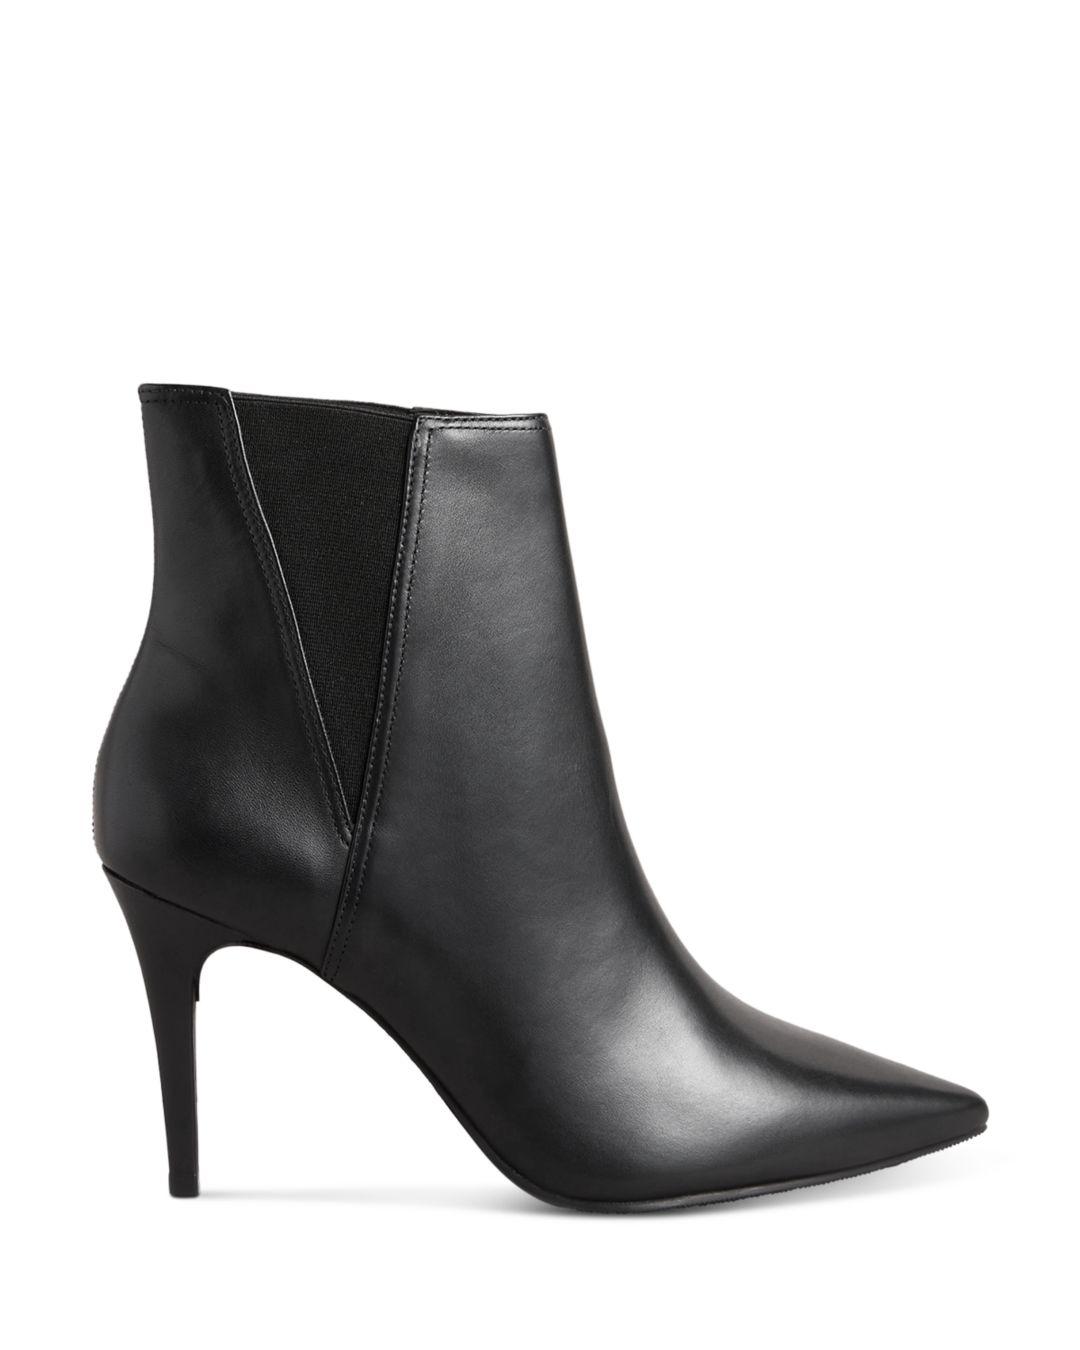 Ted Baker Maaryal Pull On Pointed Toe Stiletto Ankle Boots in Black | Lyst